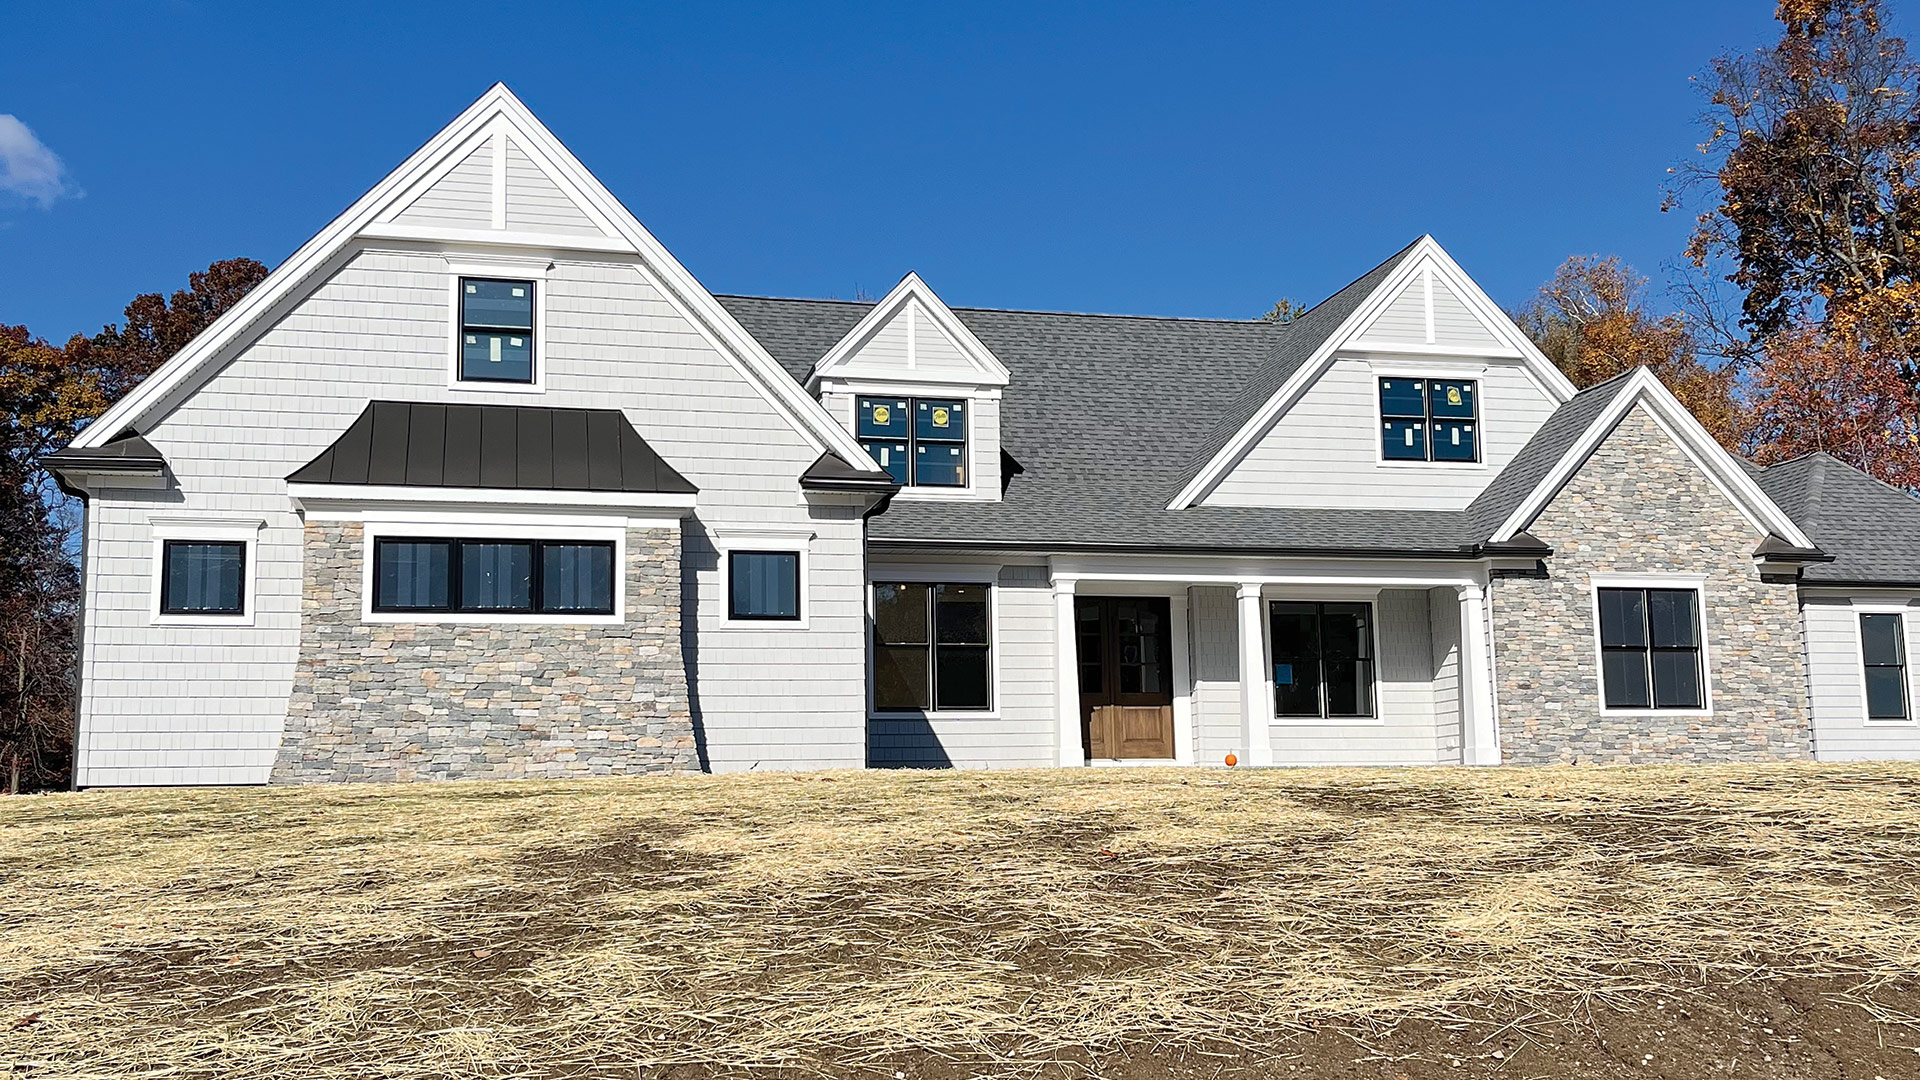 Laplante Construction recently completed this new home build in East Longmeadow.